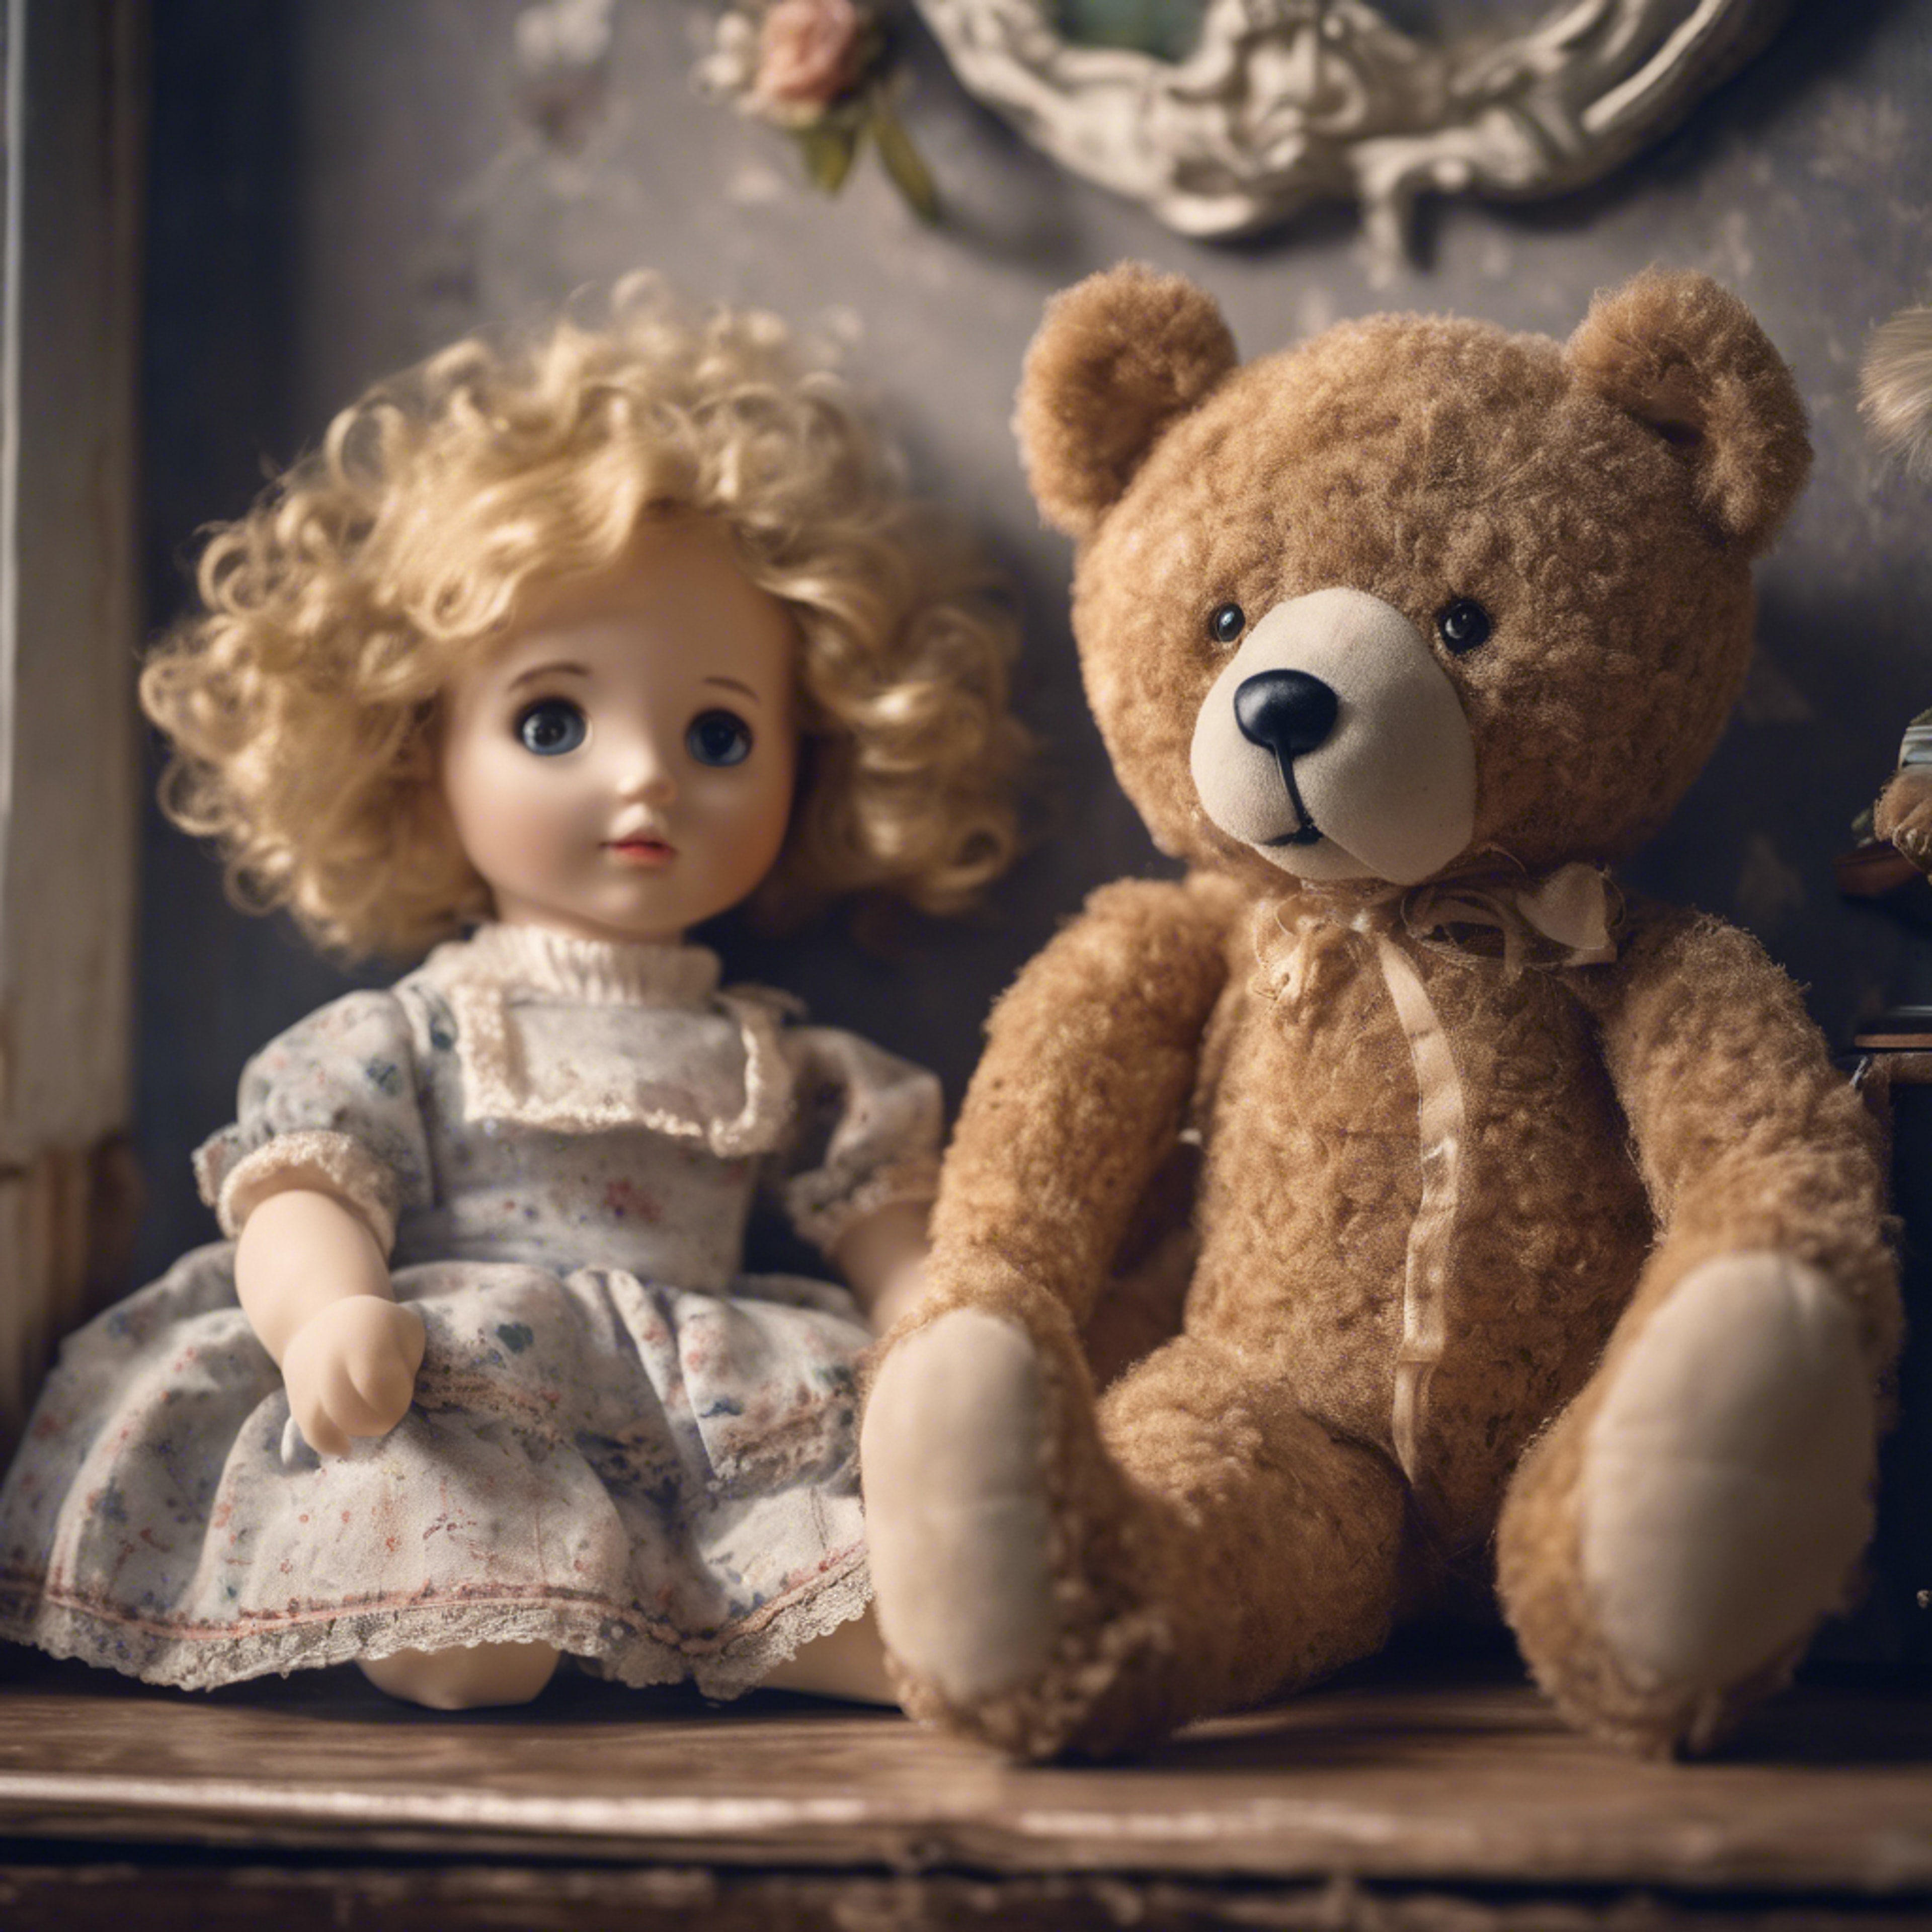 A stuffed teddy bear next to a porcelain doll in an old-fashioned child's room. Тапет[4cda63de3c9241699390]